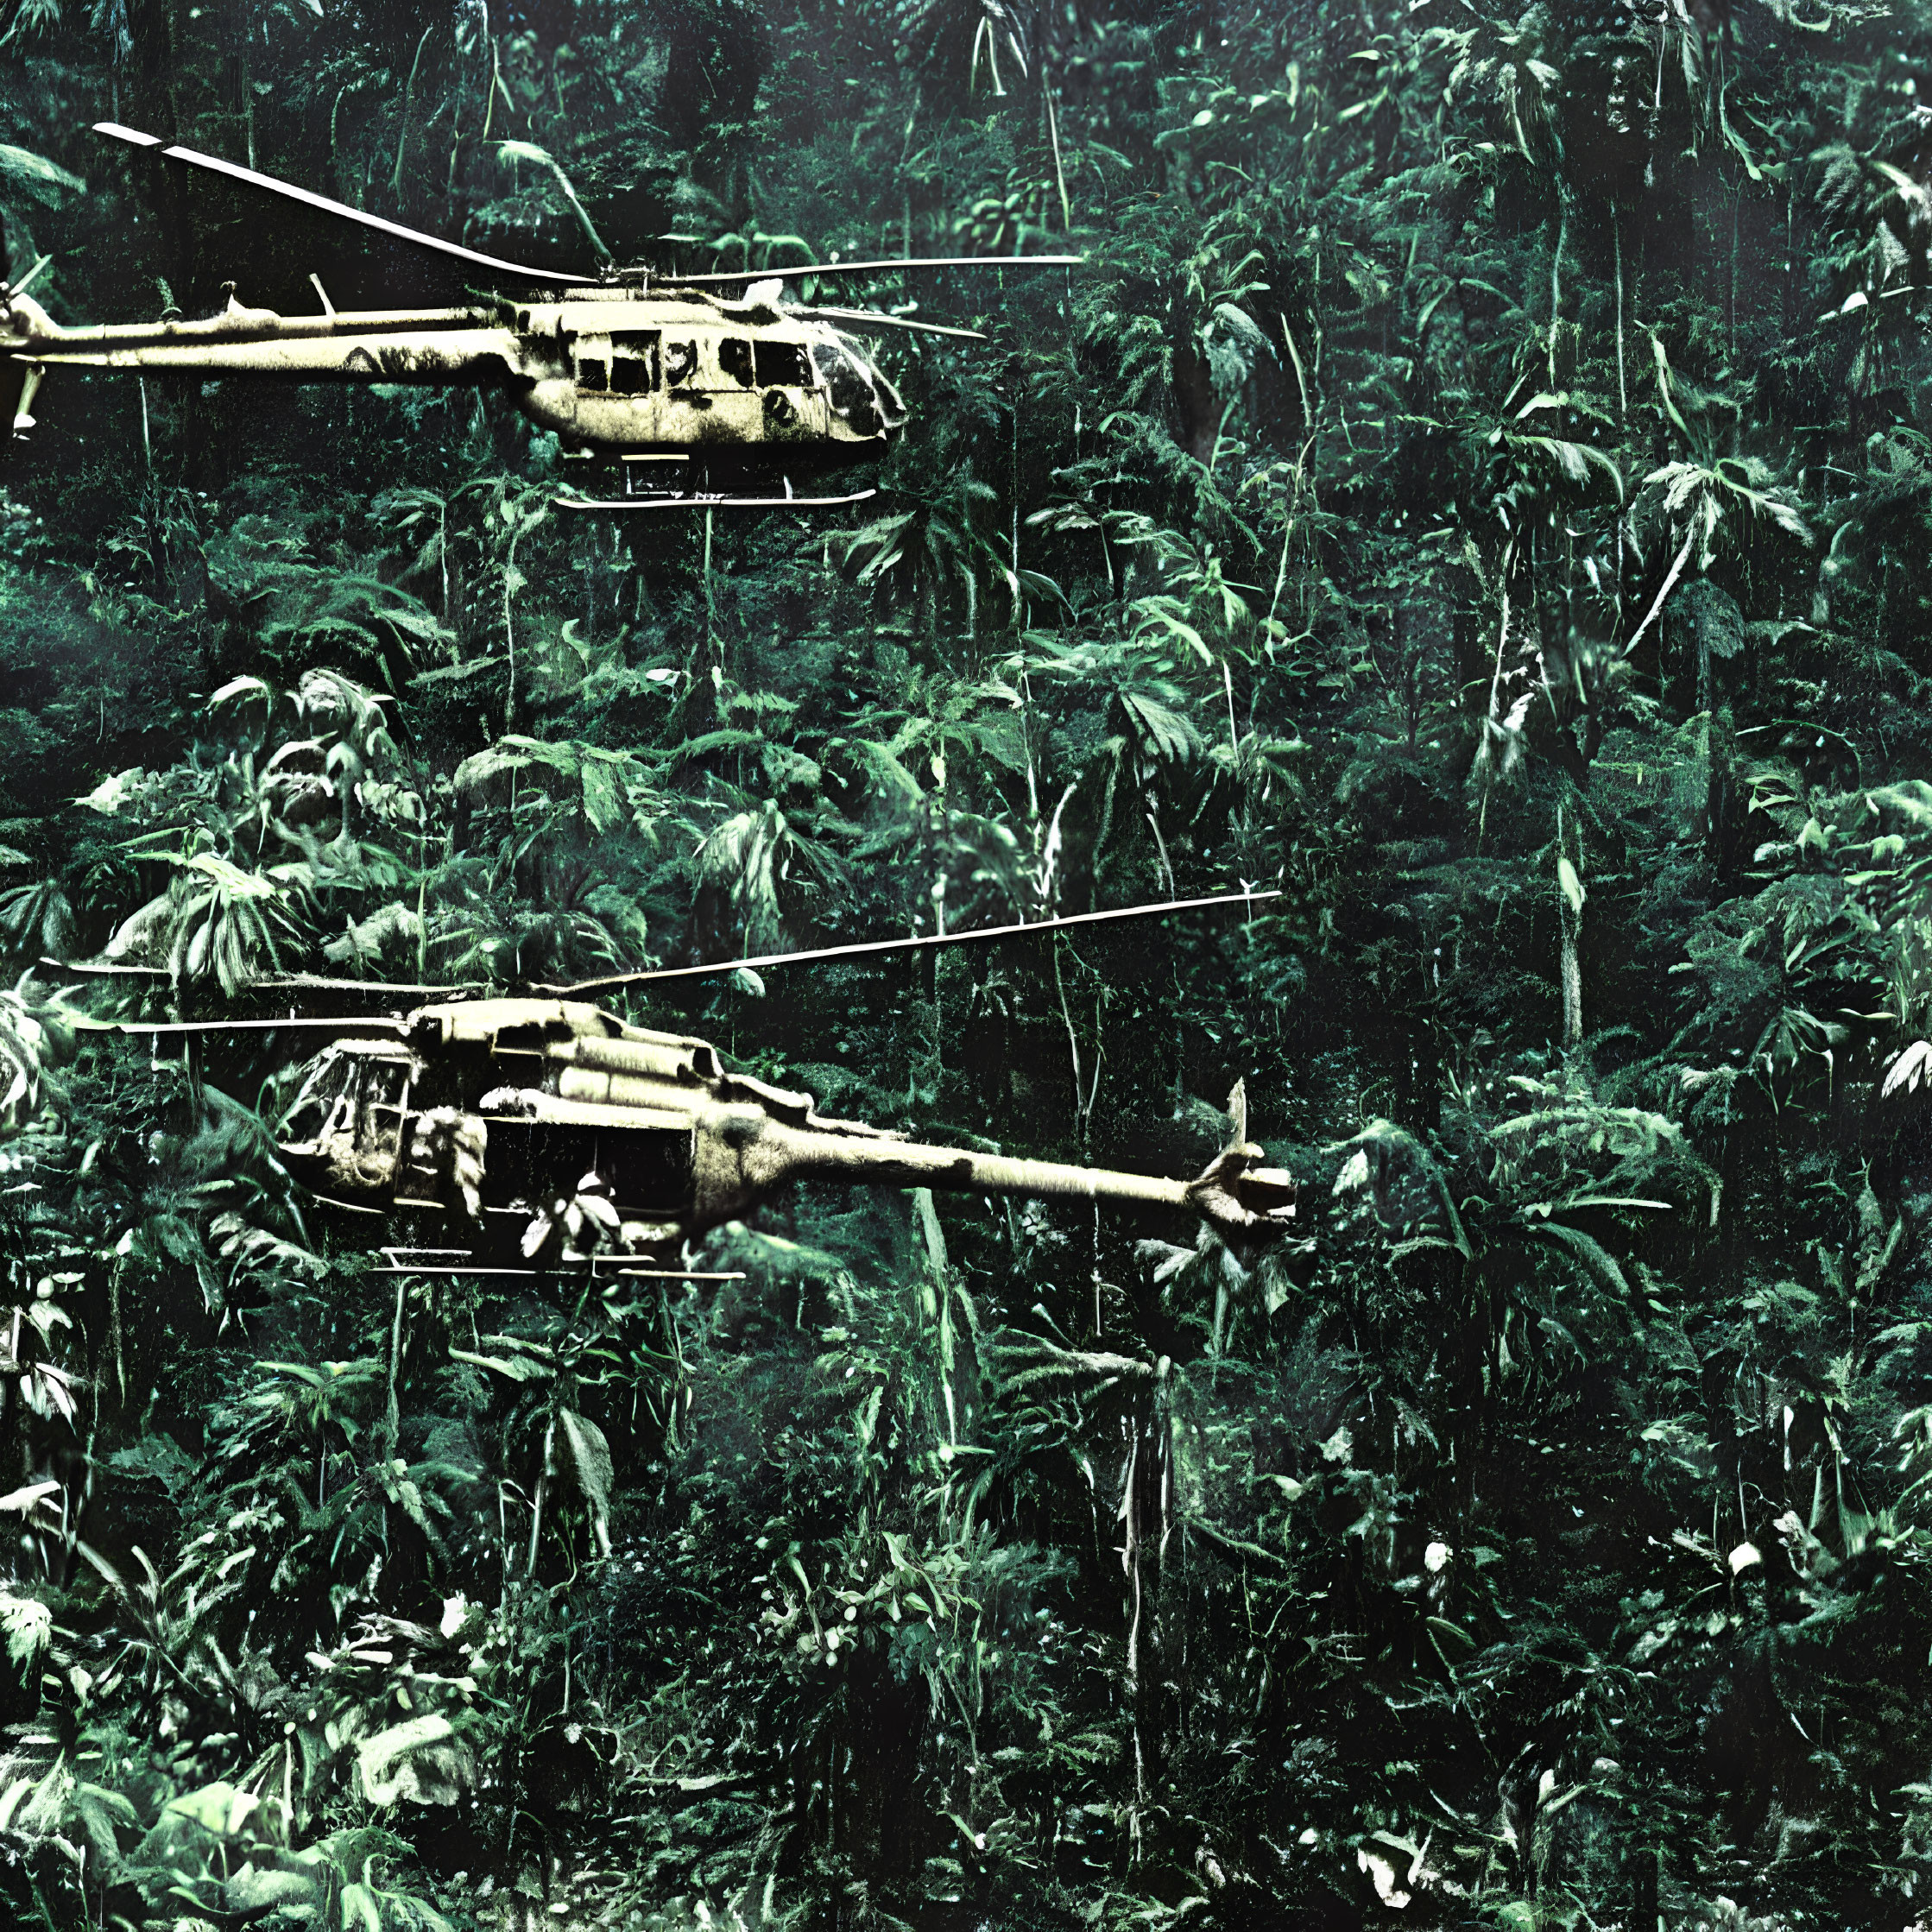 Military helicopters fly low over dense jungle canopy